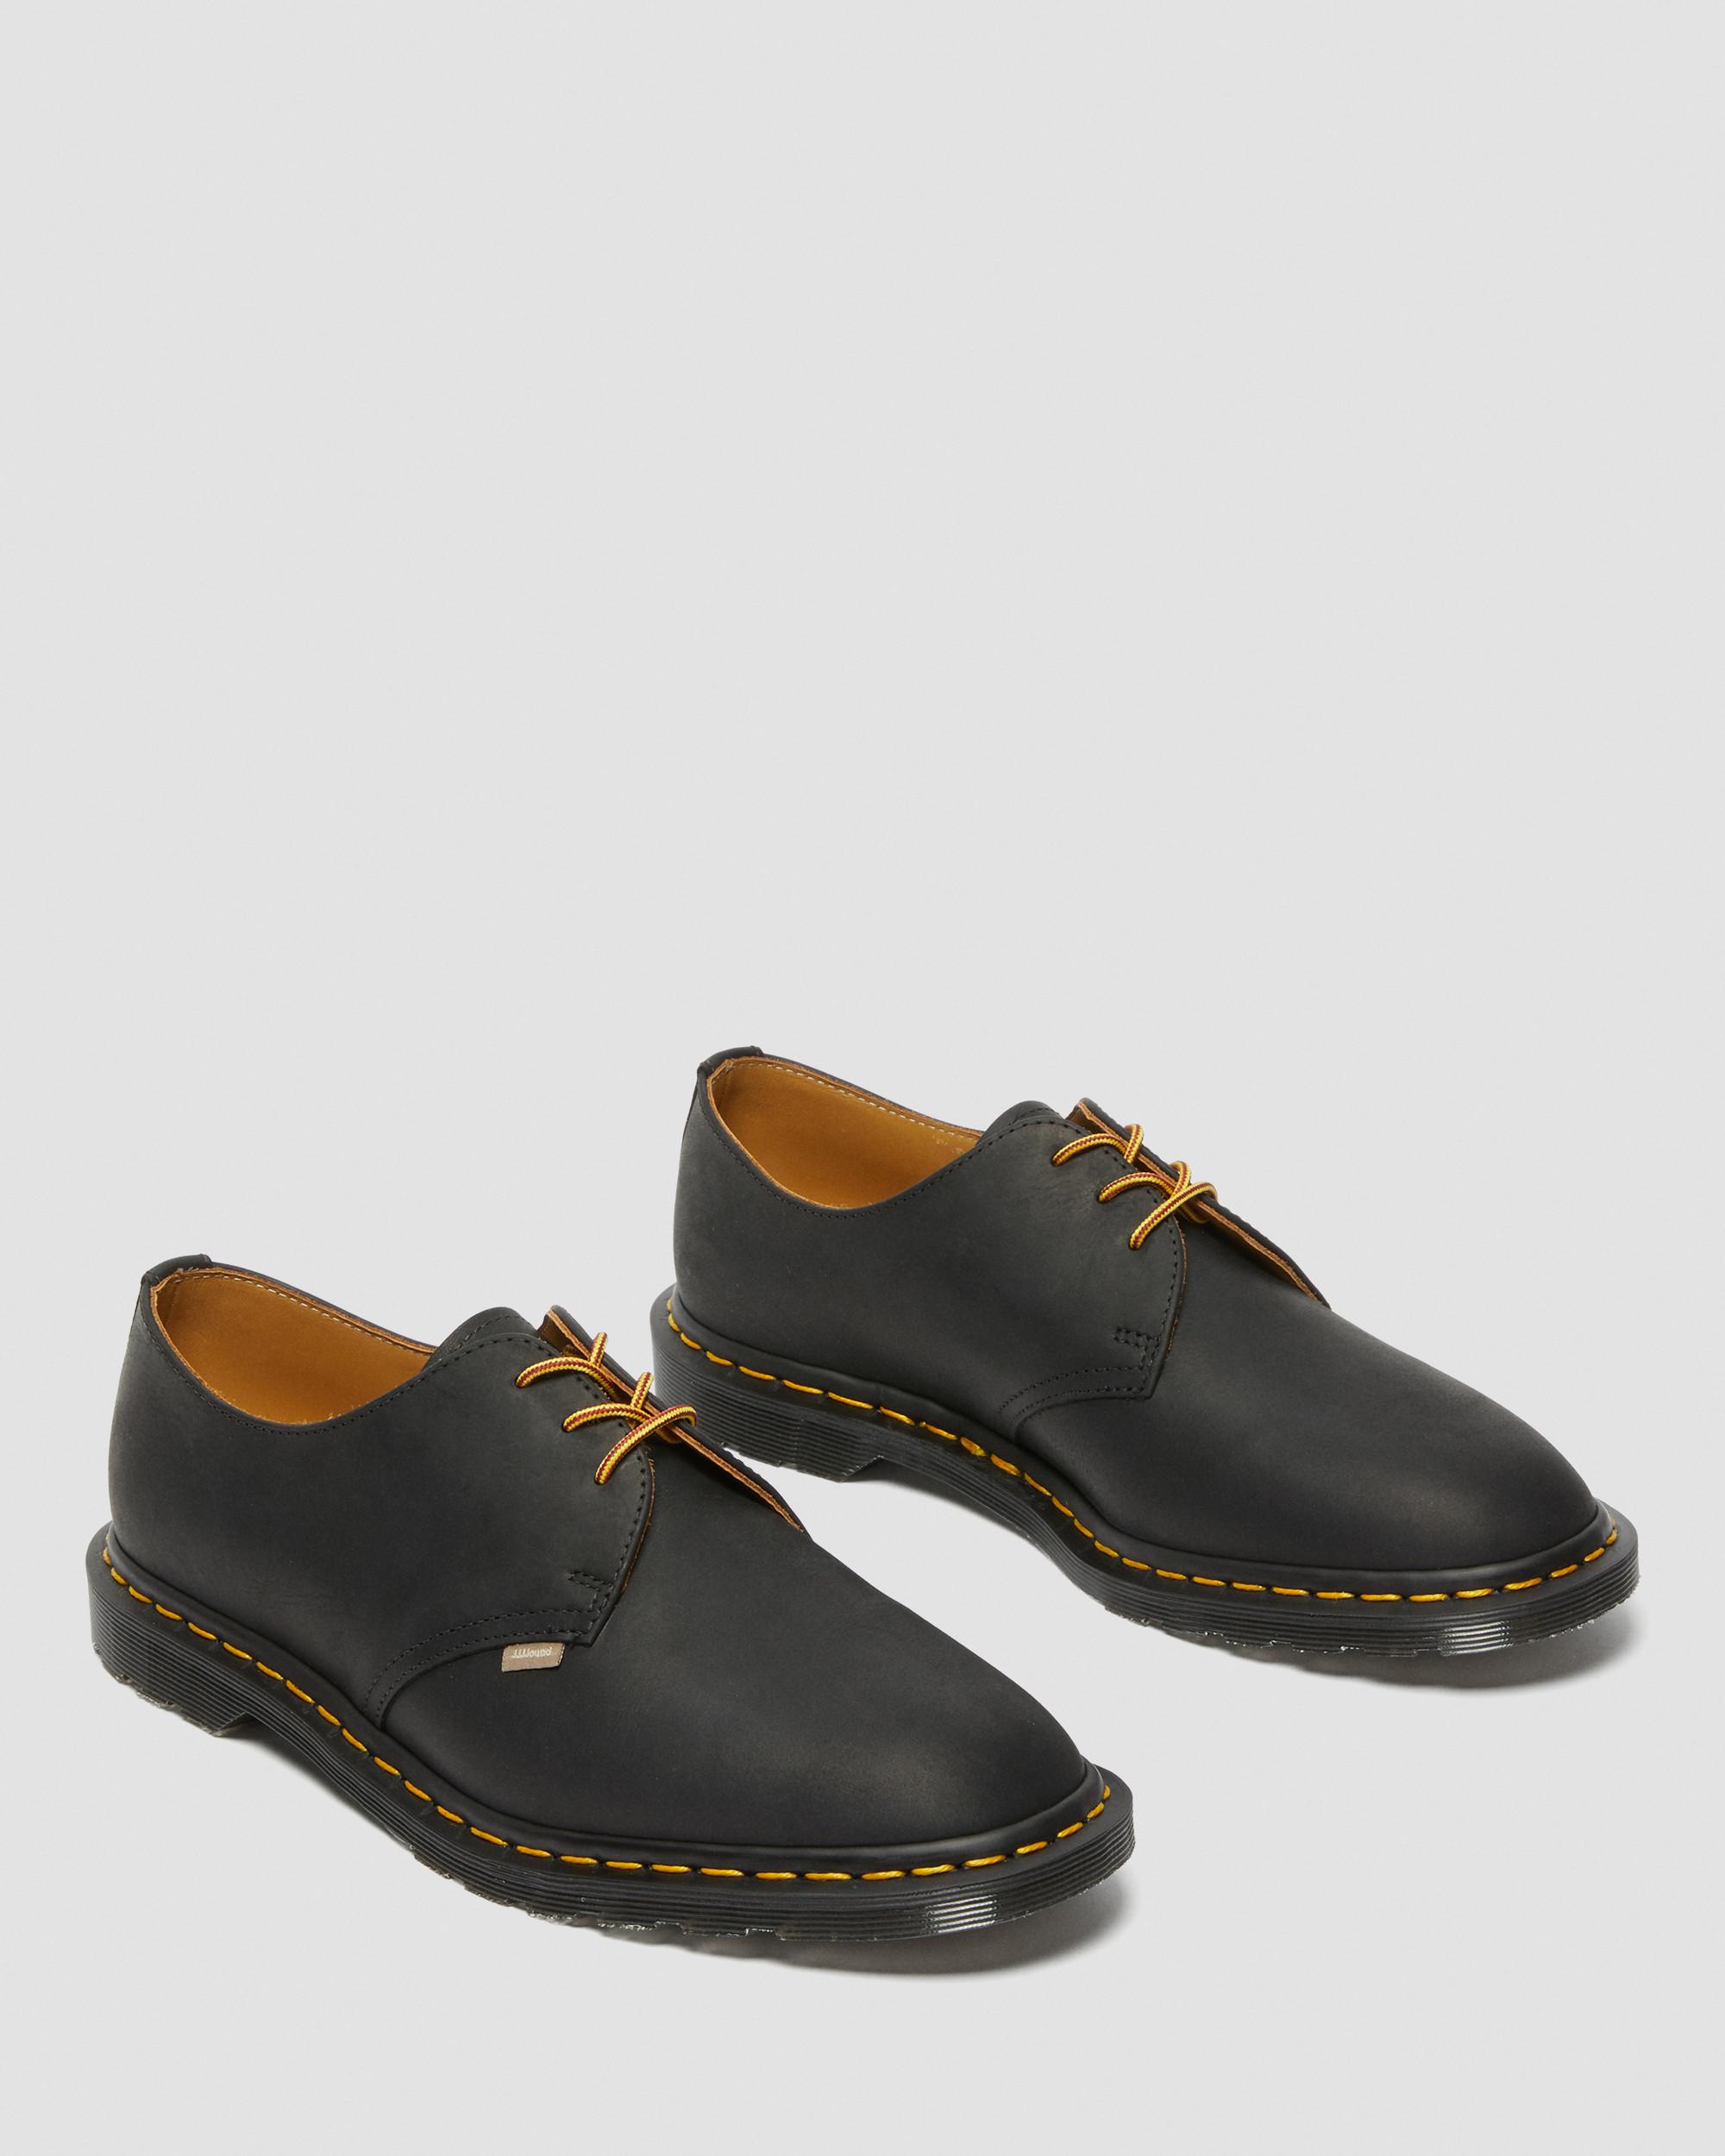 DR MARTENS Archie II JJJJound Wyoming Leather Lace Up Shoes